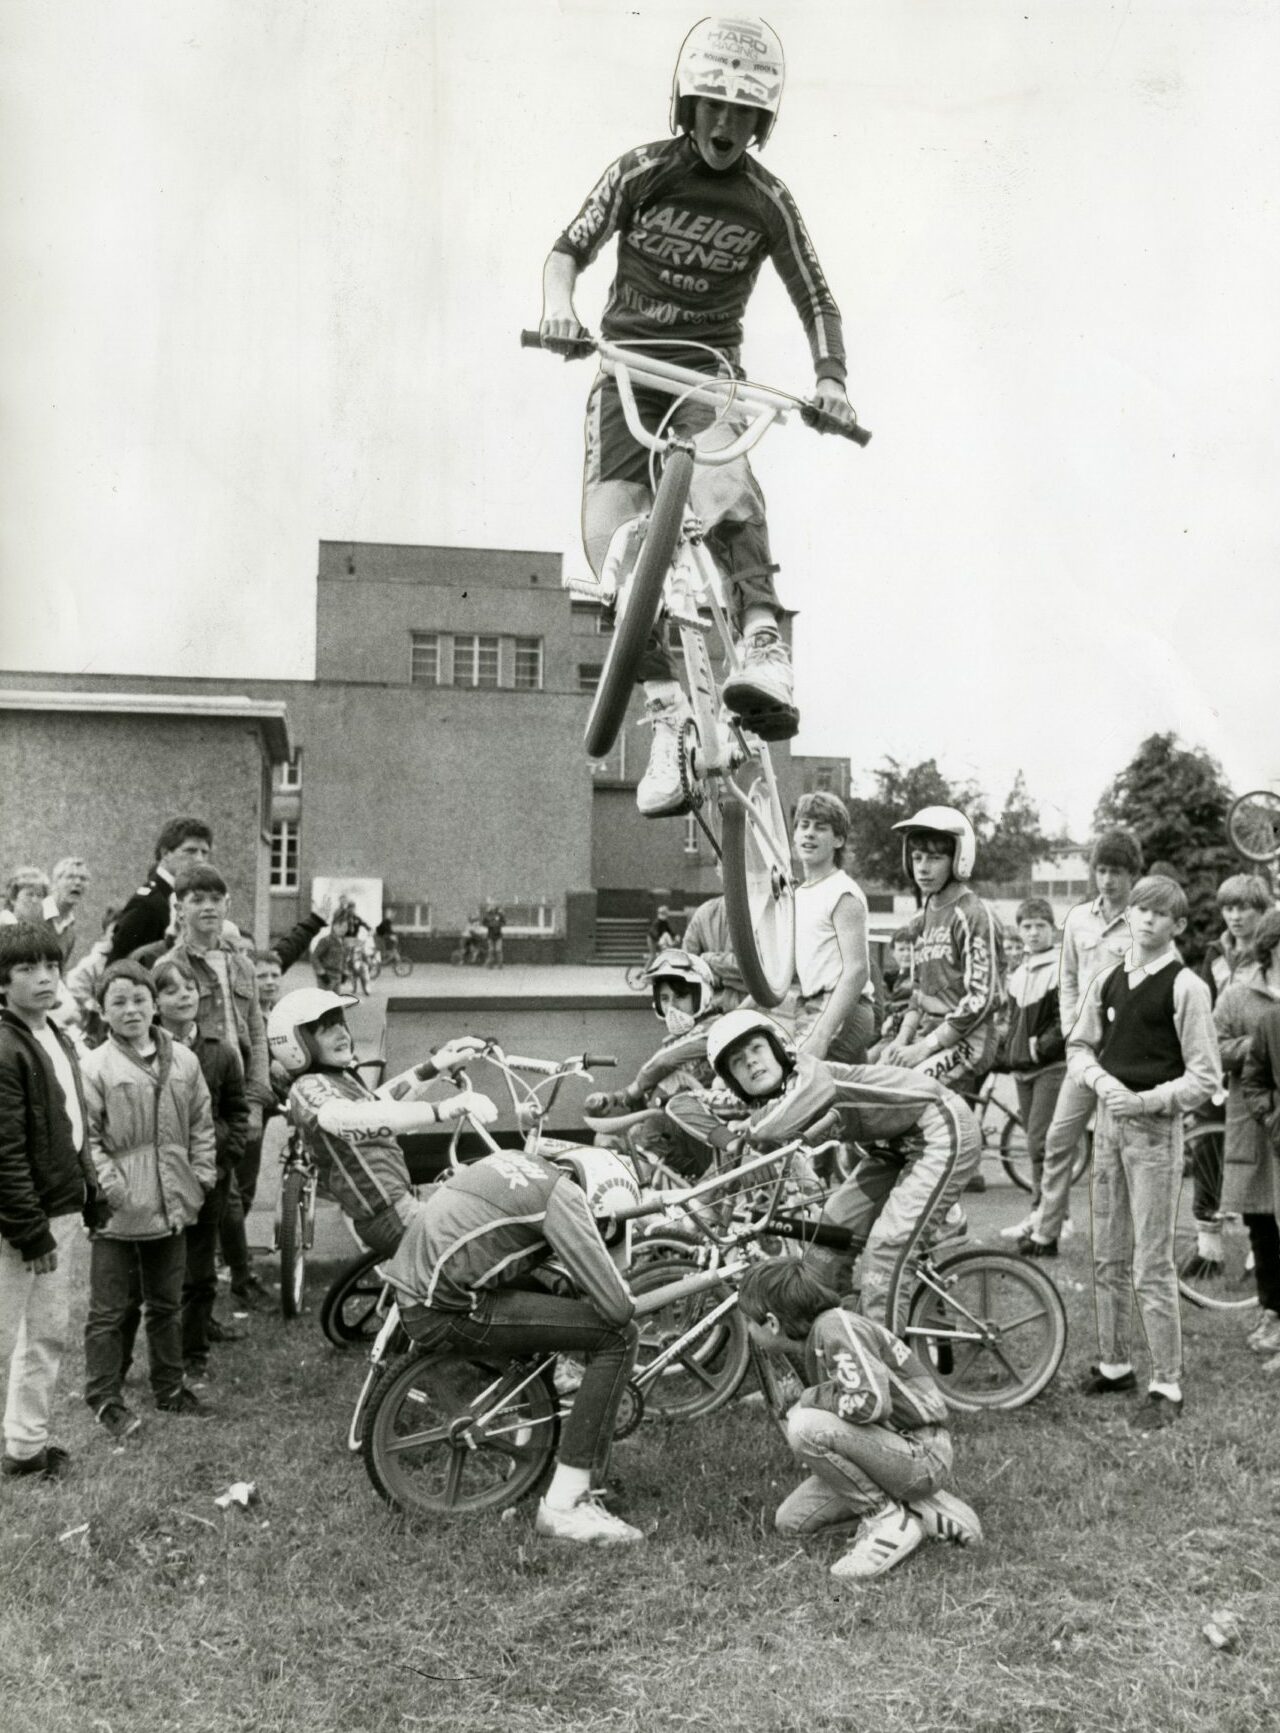 Scott Carroll hits the heights doing a BMX jump in 1985. Image: DC Thomson.